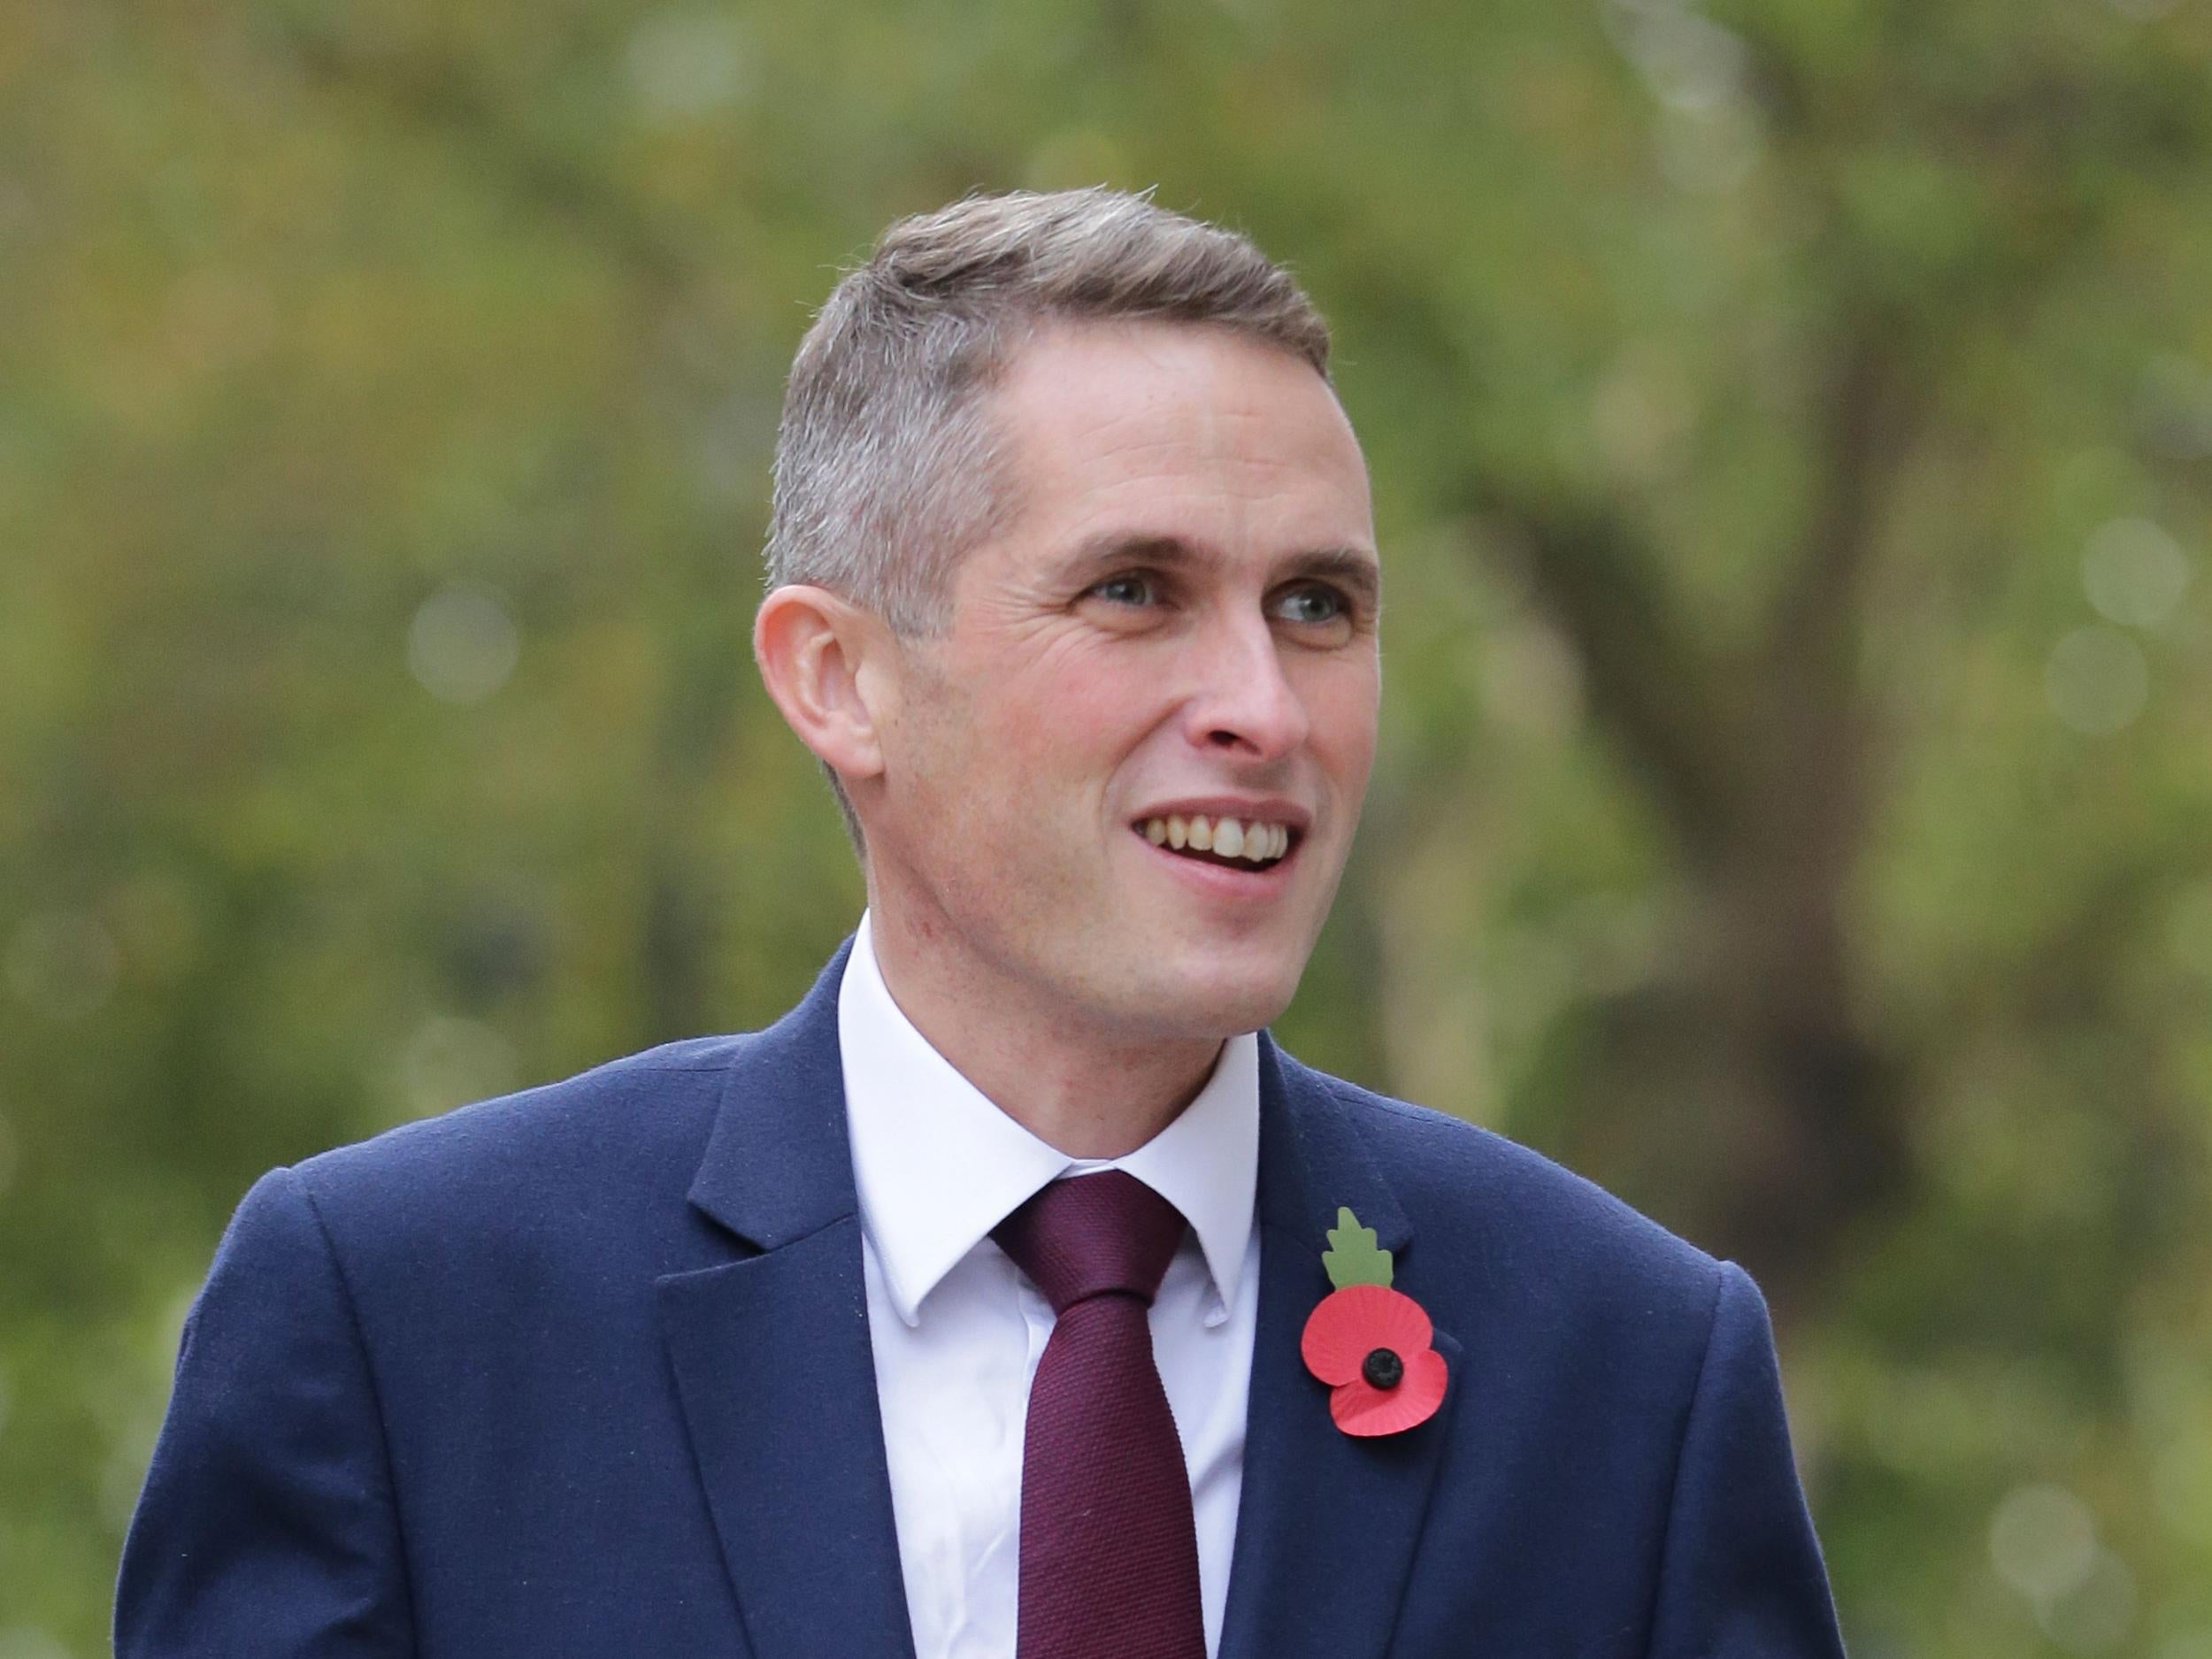 The row has surfaced weeks after Theresa May ally Gavin Williamson was appointed Defence Secretary